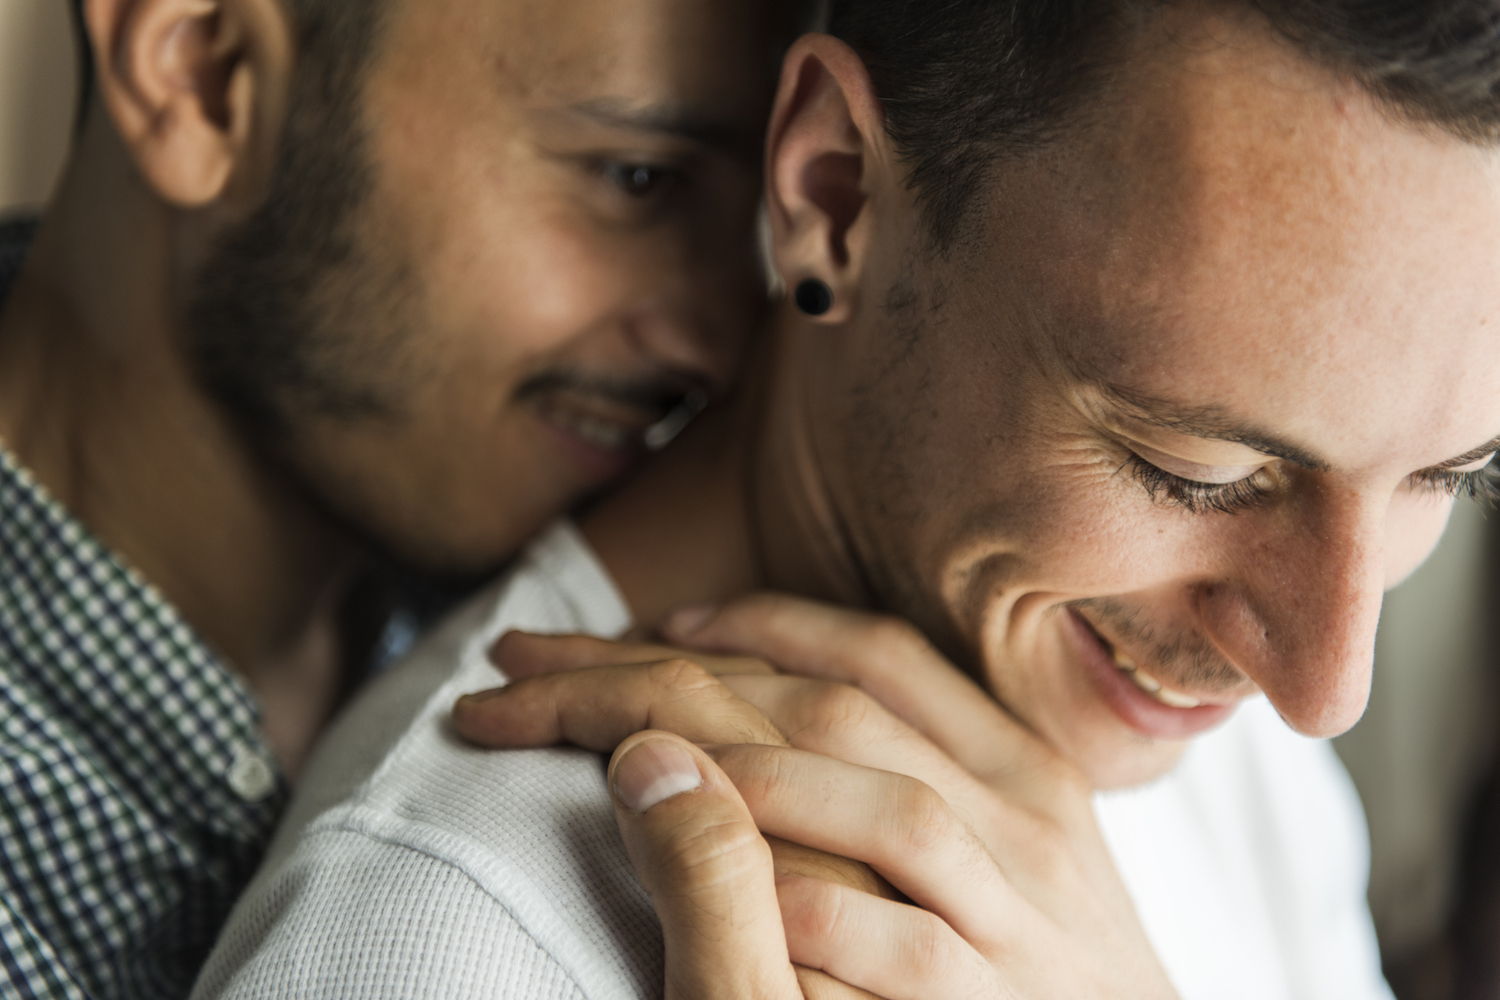 A close up of a male couple having an intimate moment. One is hugging the other from behind him.